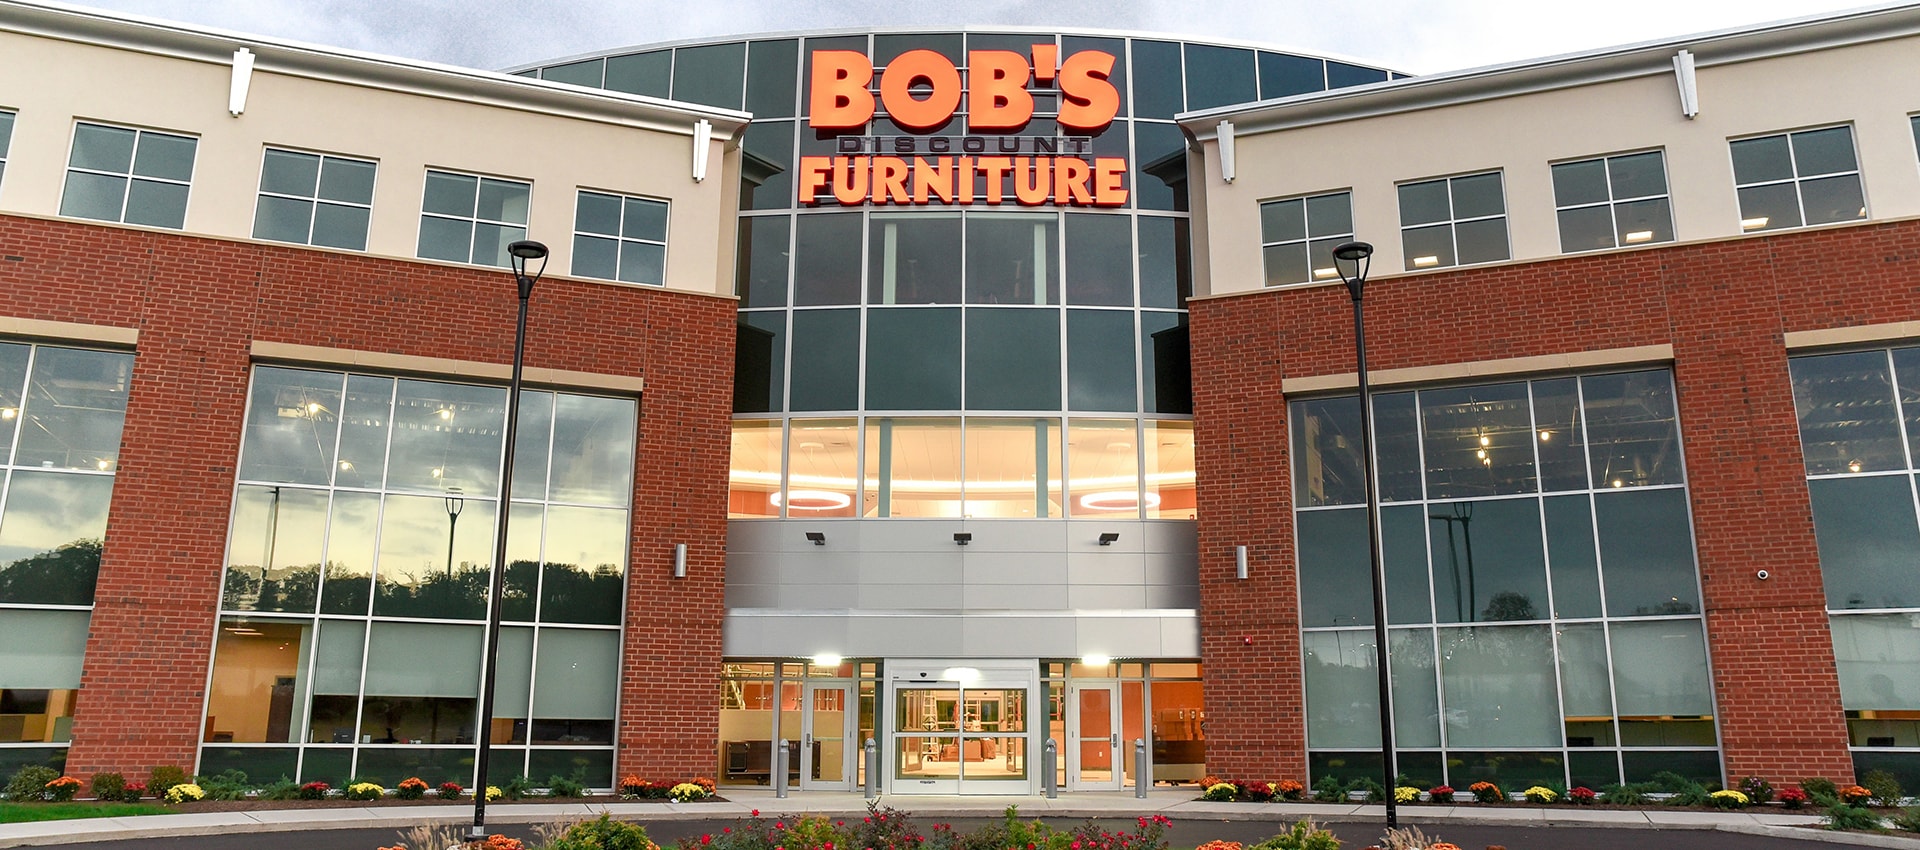 Bobs Furniture HQ - Manchester CT